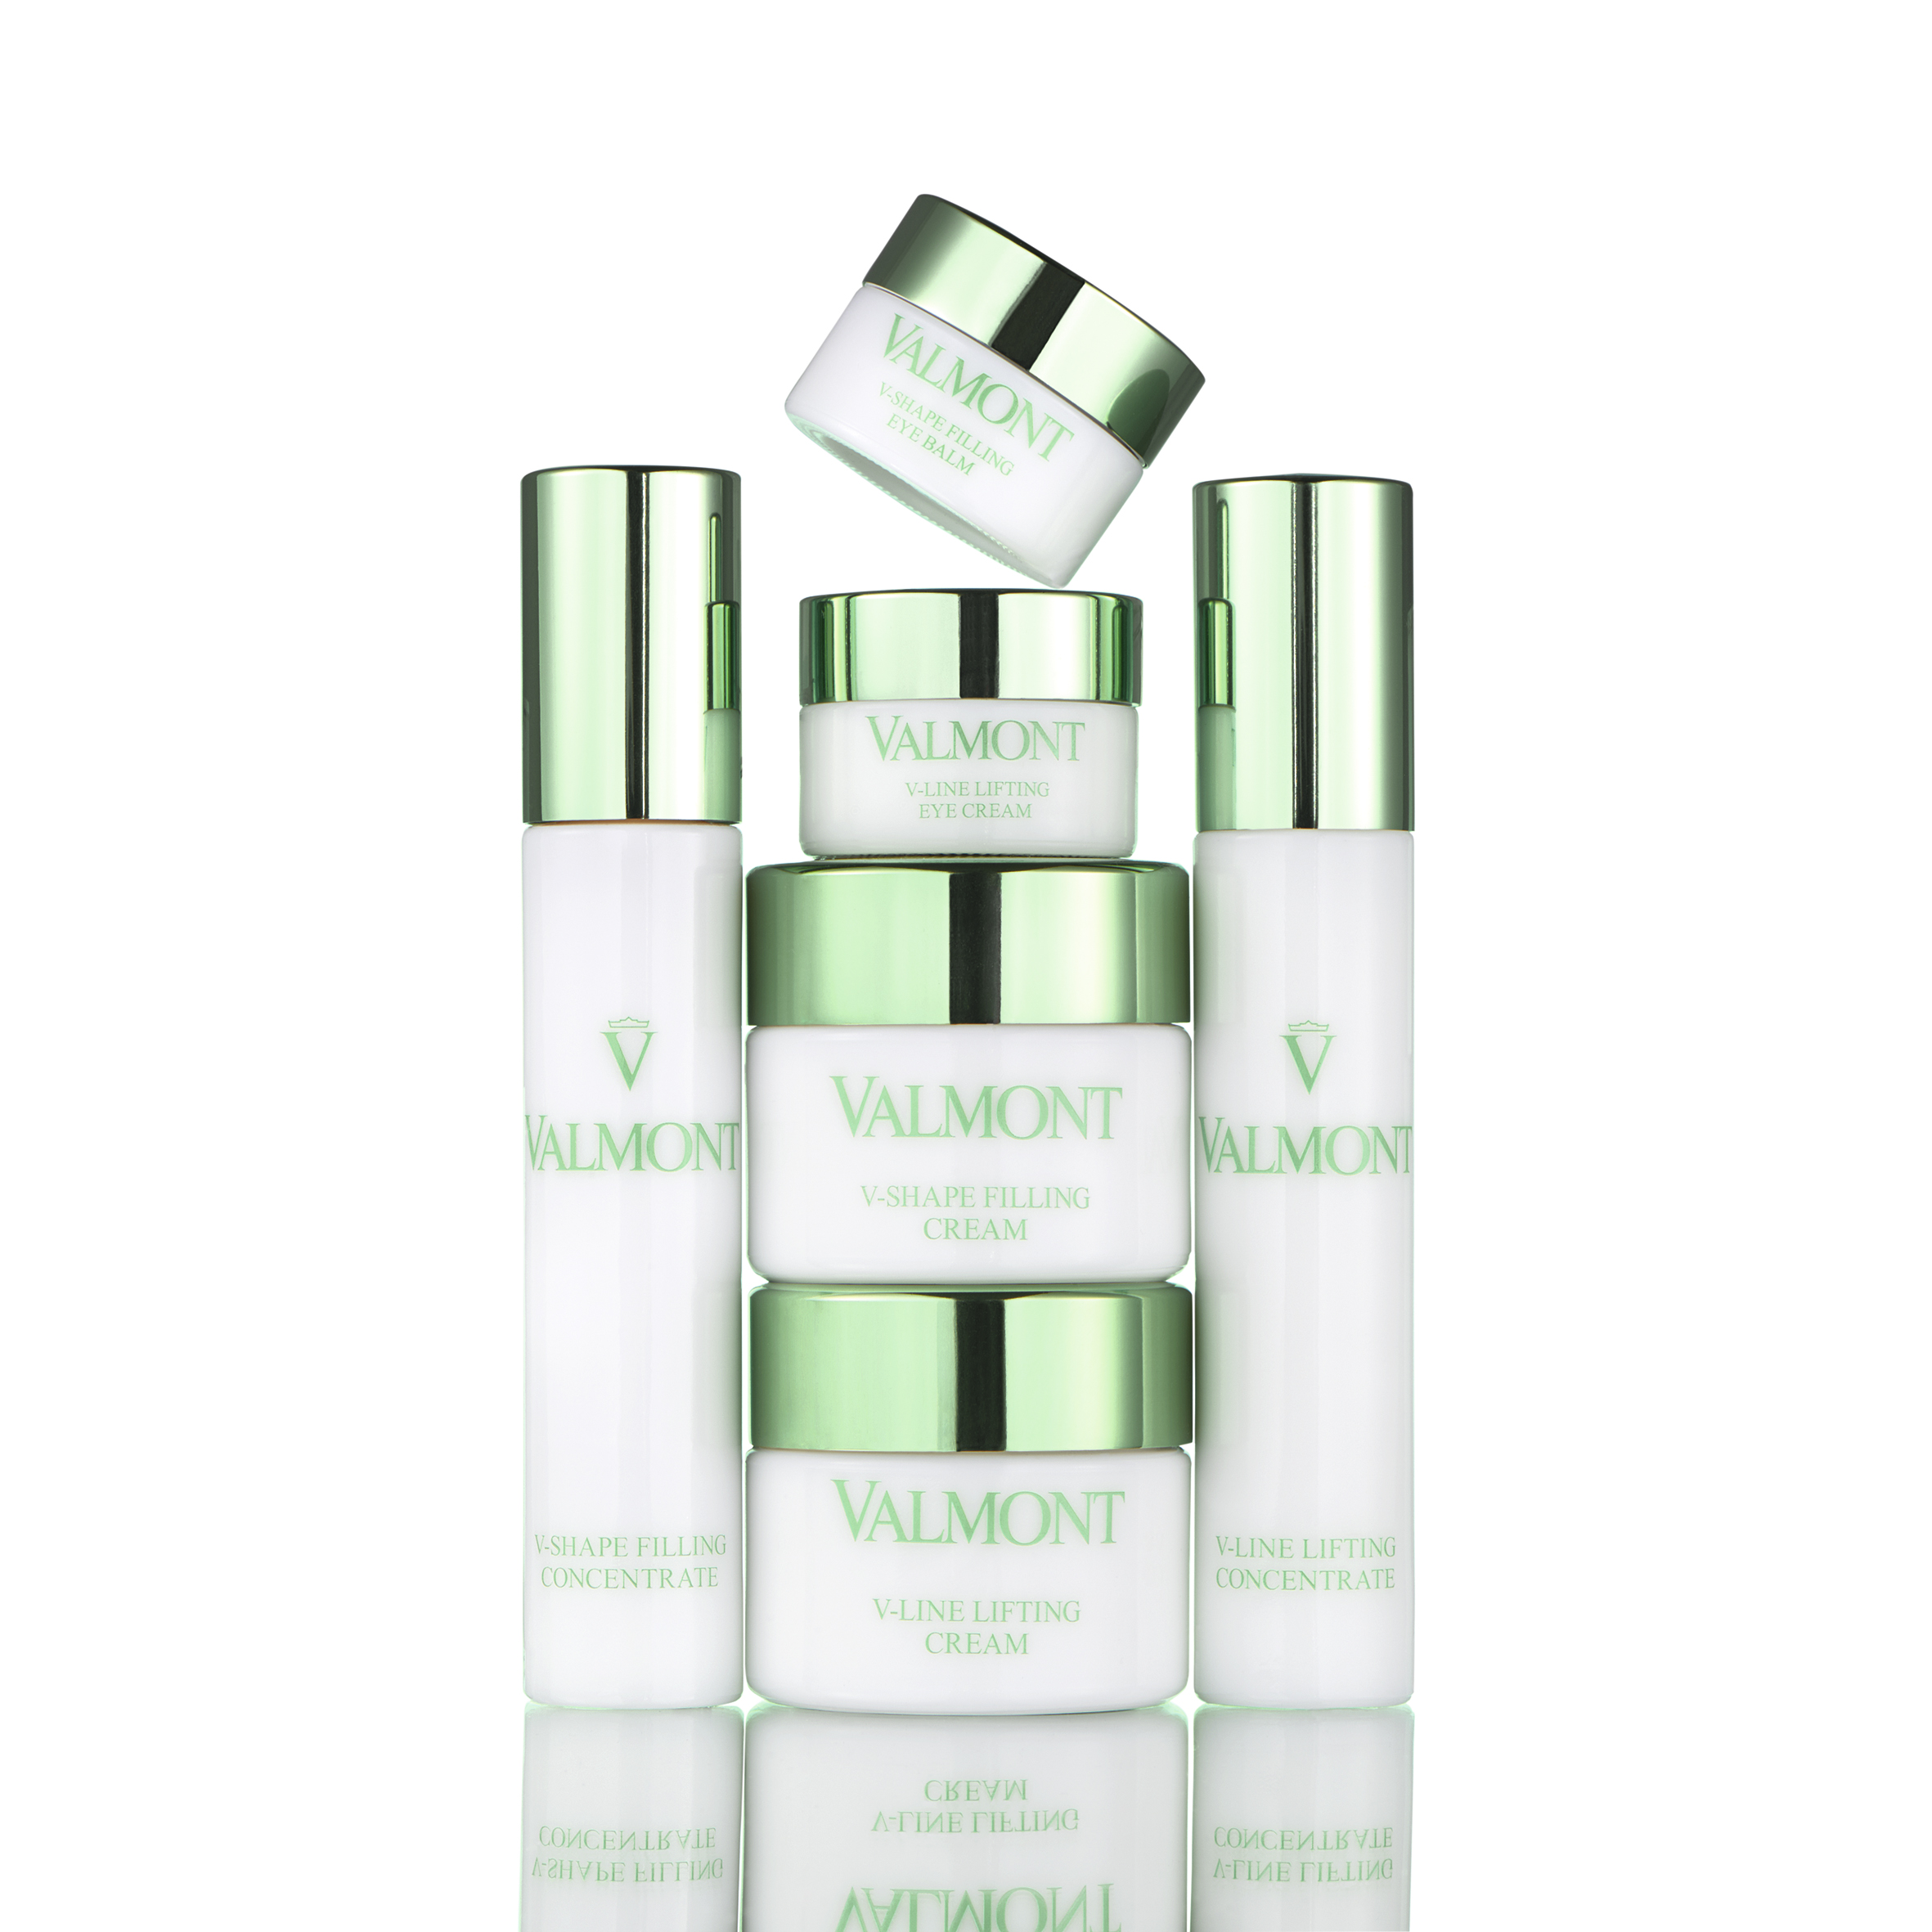 Lines lift. Valmont набор Eye Lifting. V Shape filling Concentrate Valmont. Valmont v-line Lifting Concentrate сыворотка-лифтинг для лица. Valmont на САДОВОДЕ.